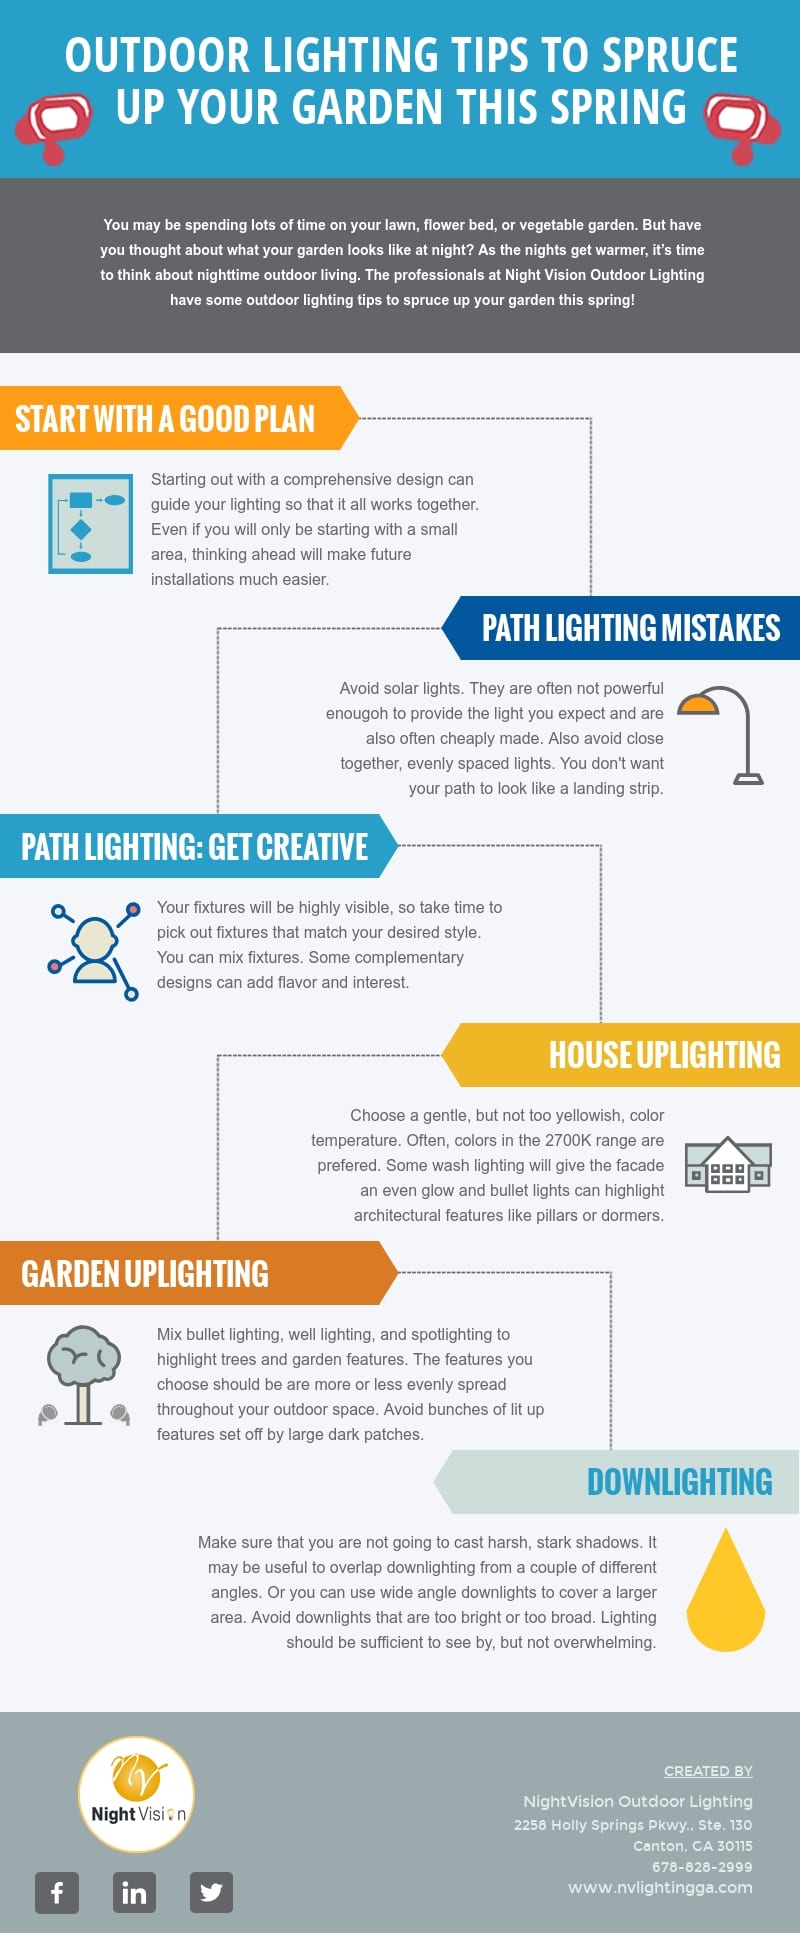 Outdoor Lighting Tips to Spruce Up Your Garden This Spring [infographic]